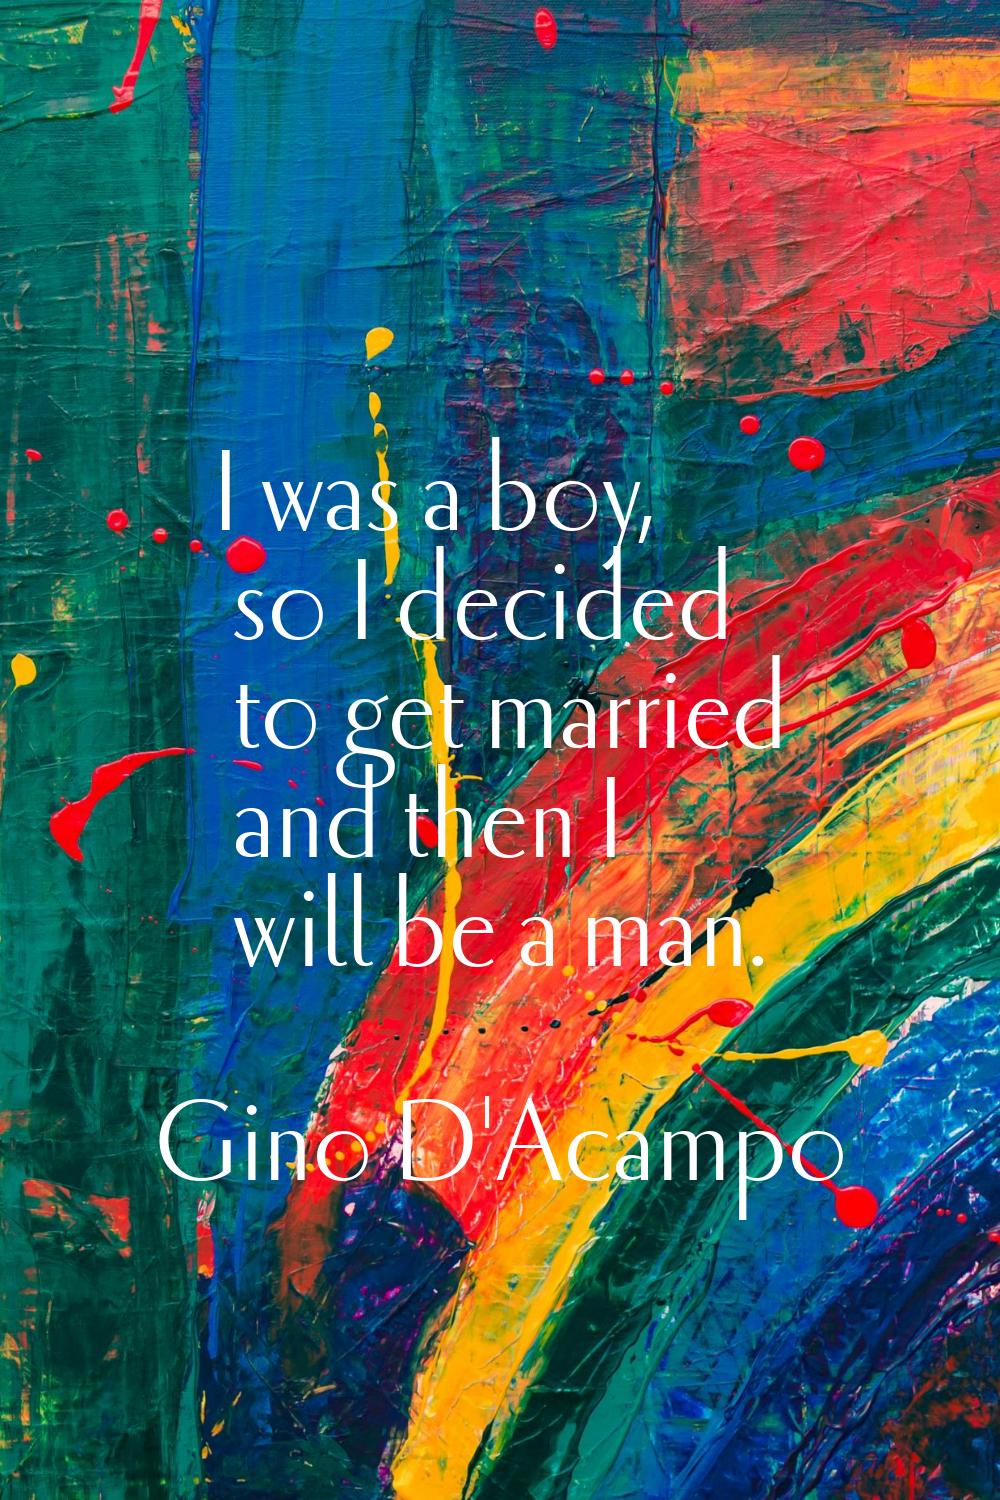 I was a boy, so I decided to get married and then I will be a man.